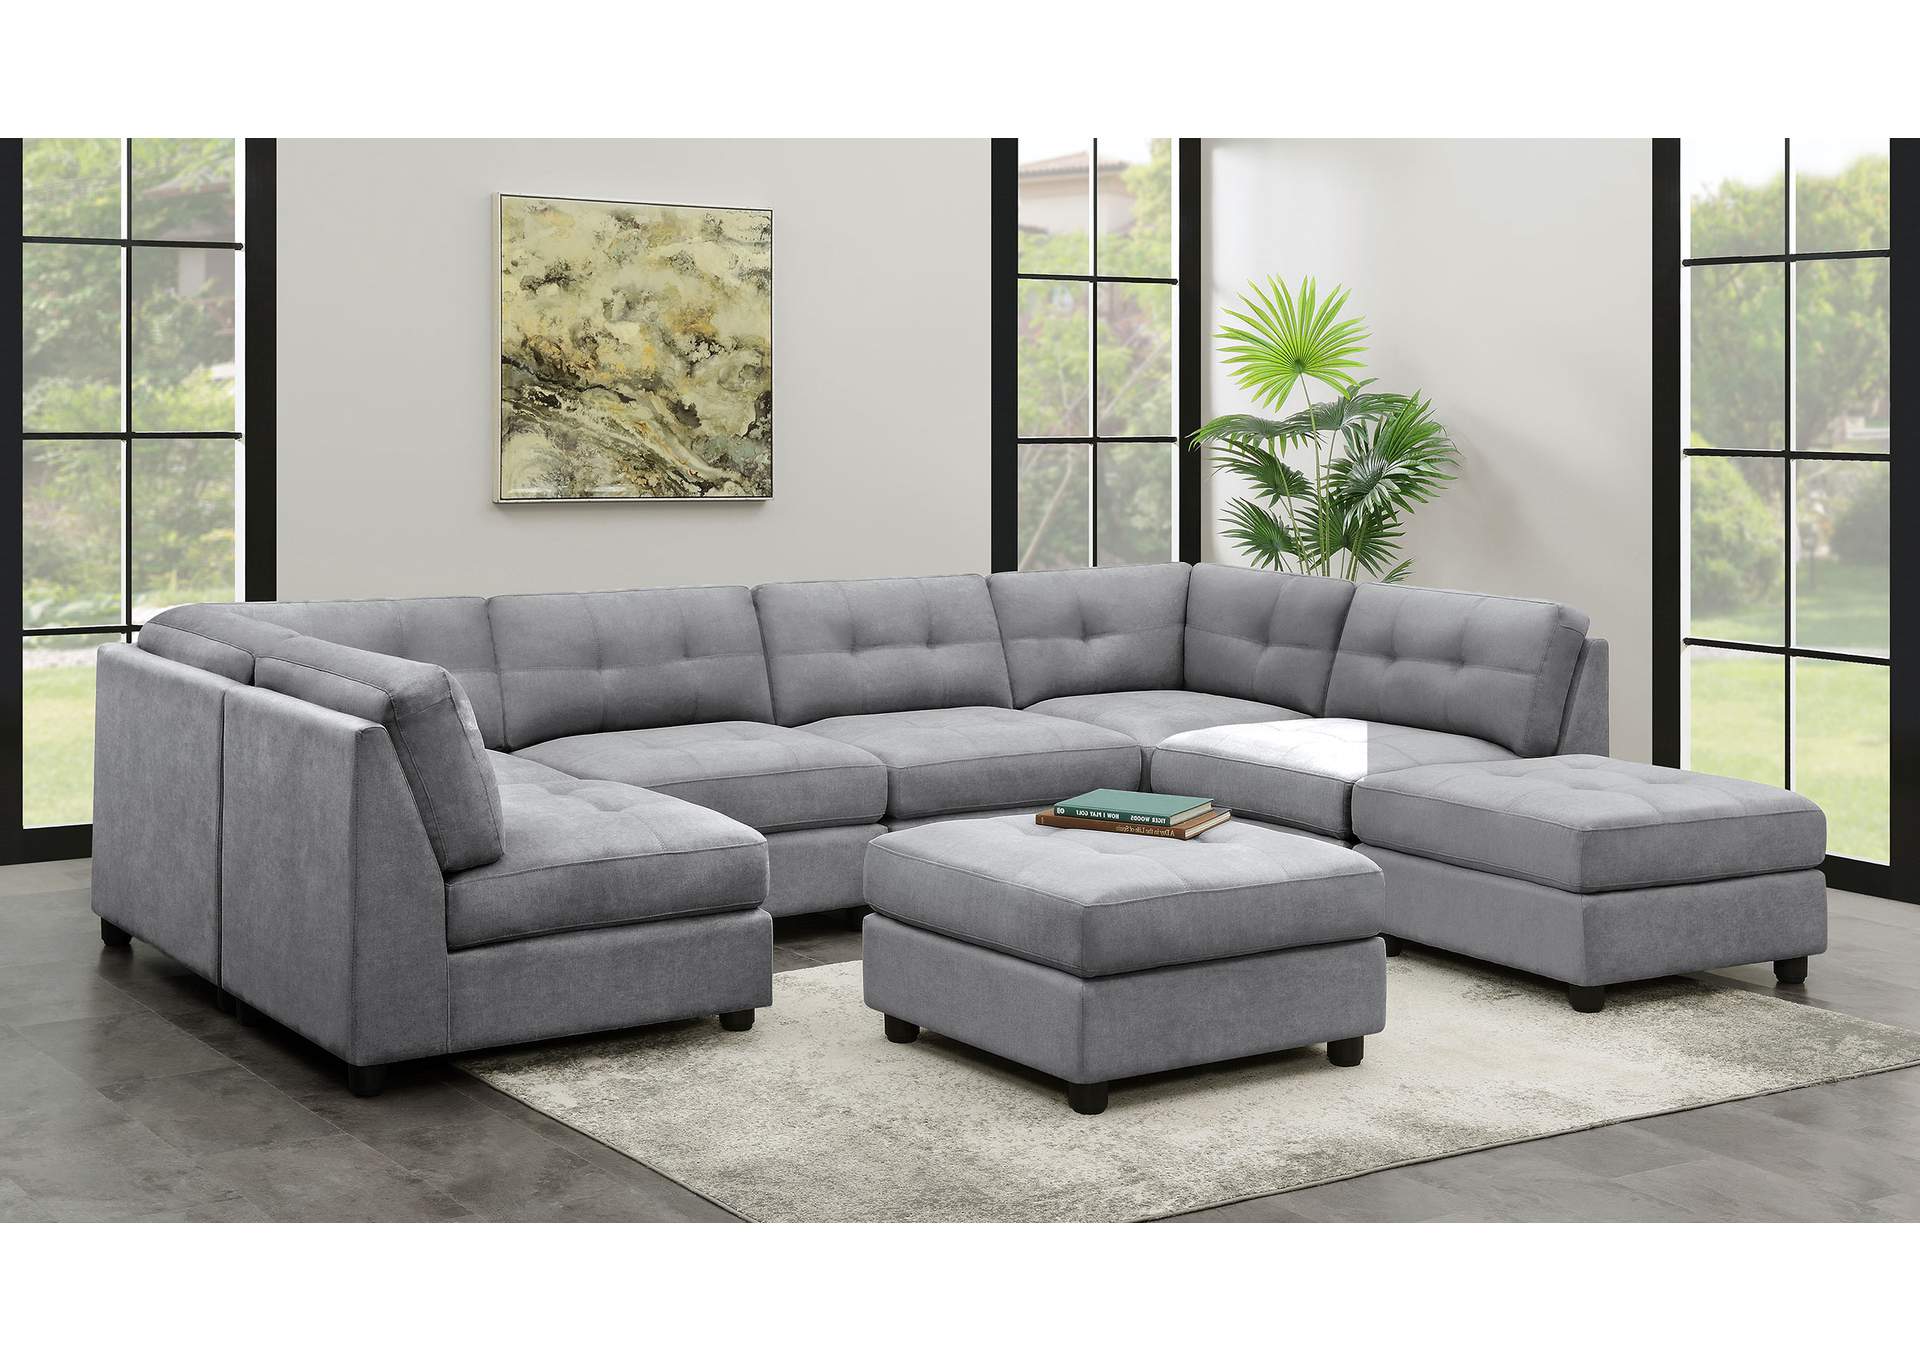 Claude 7-piece Upholstered Modular Tufted Sectional Dove,Coaster Furniture